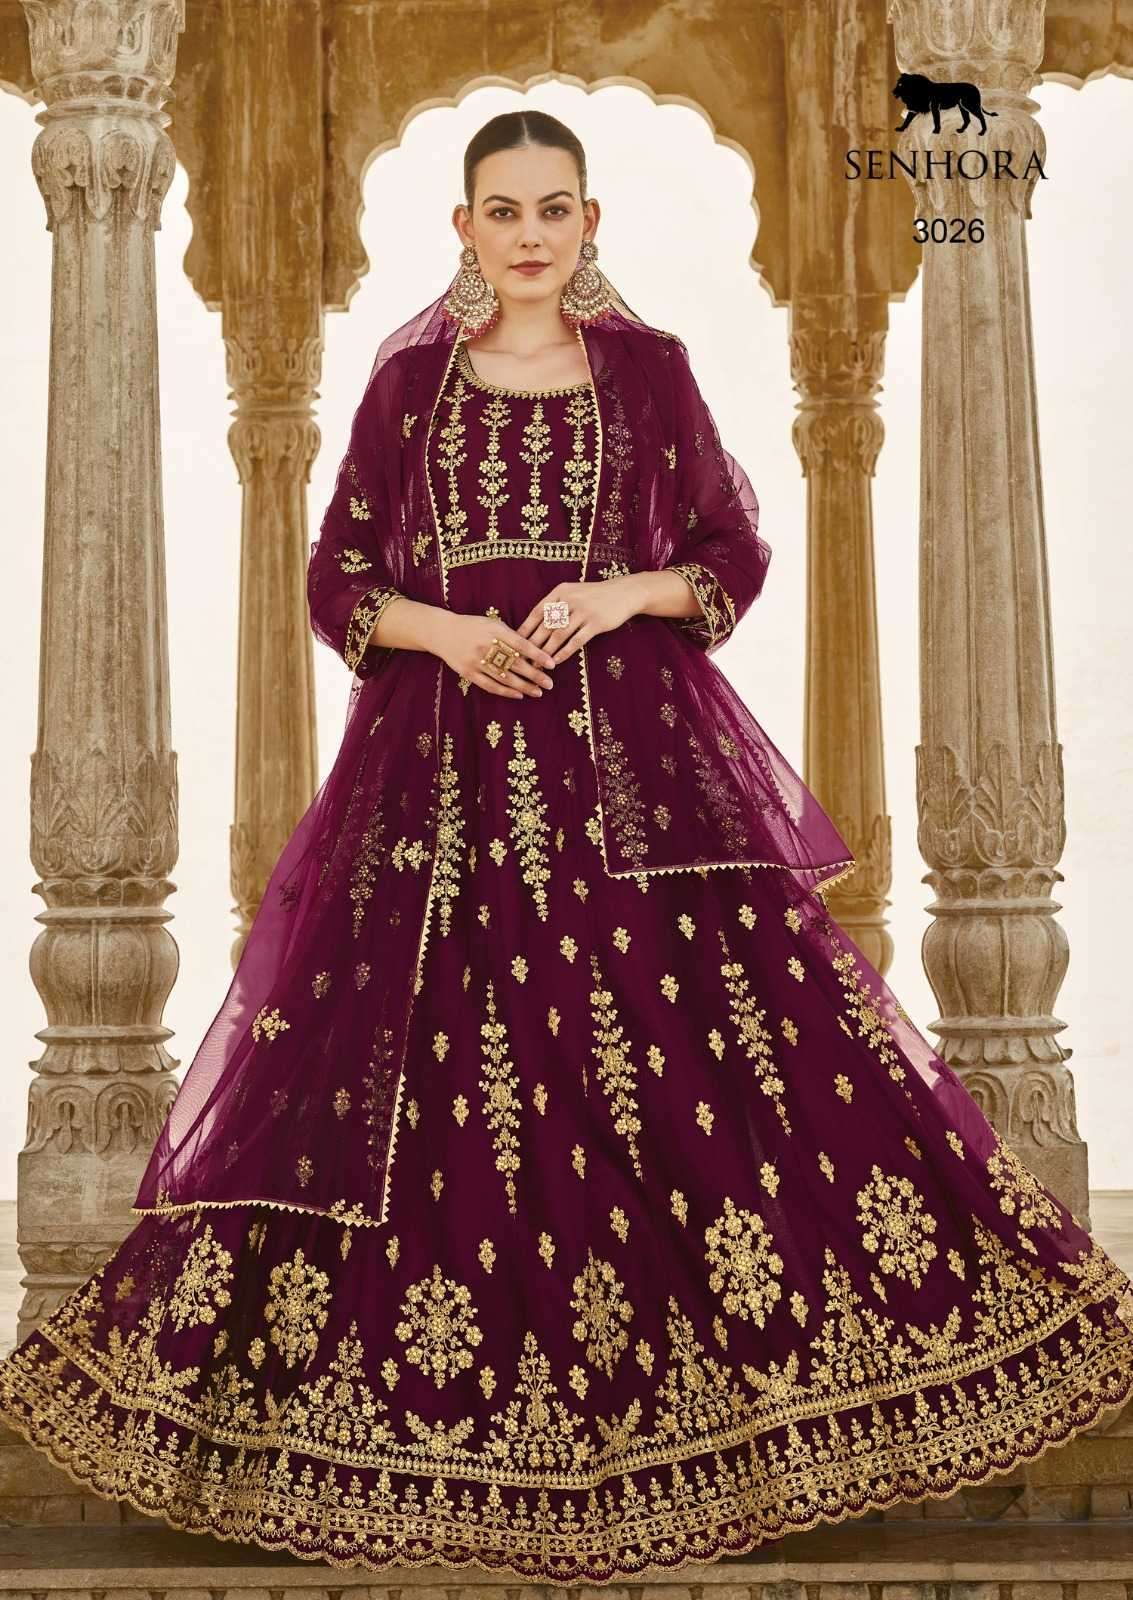 NIRJALA SERIES 3024 TO 3026 BY SENHORA DESIGNER WITH HEAVY WORK NET BRIDAL WEAR SUITS ARE AVAILABLE AT WHOLESALE PRICE